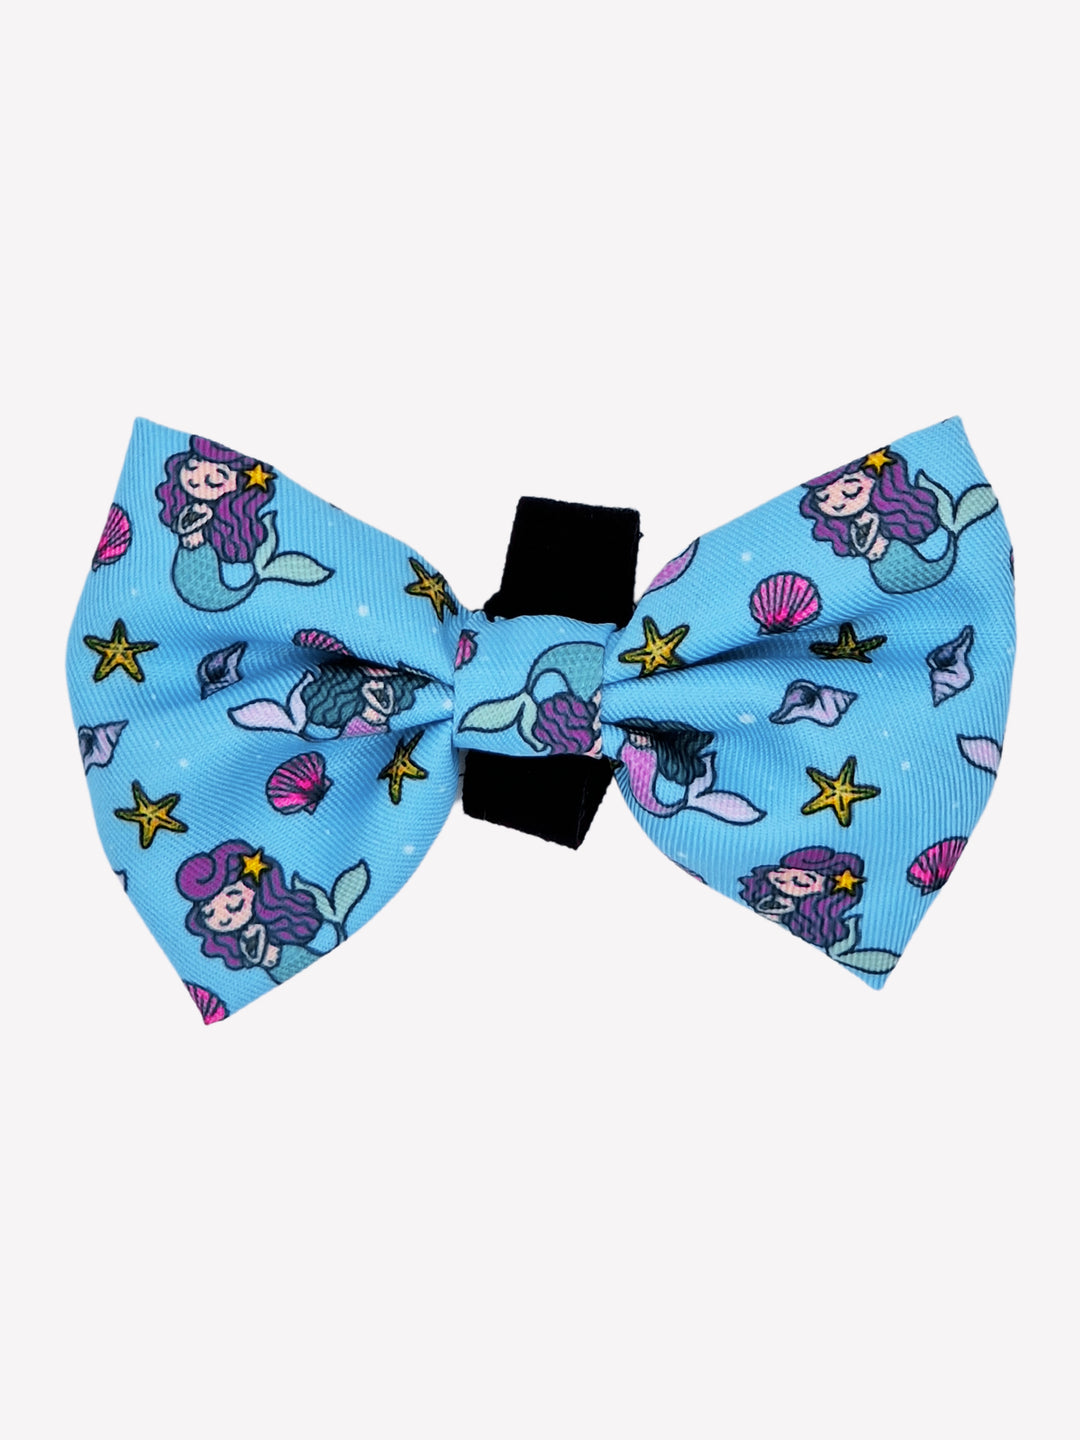 MERMAID BOW TIE FOR DOGS